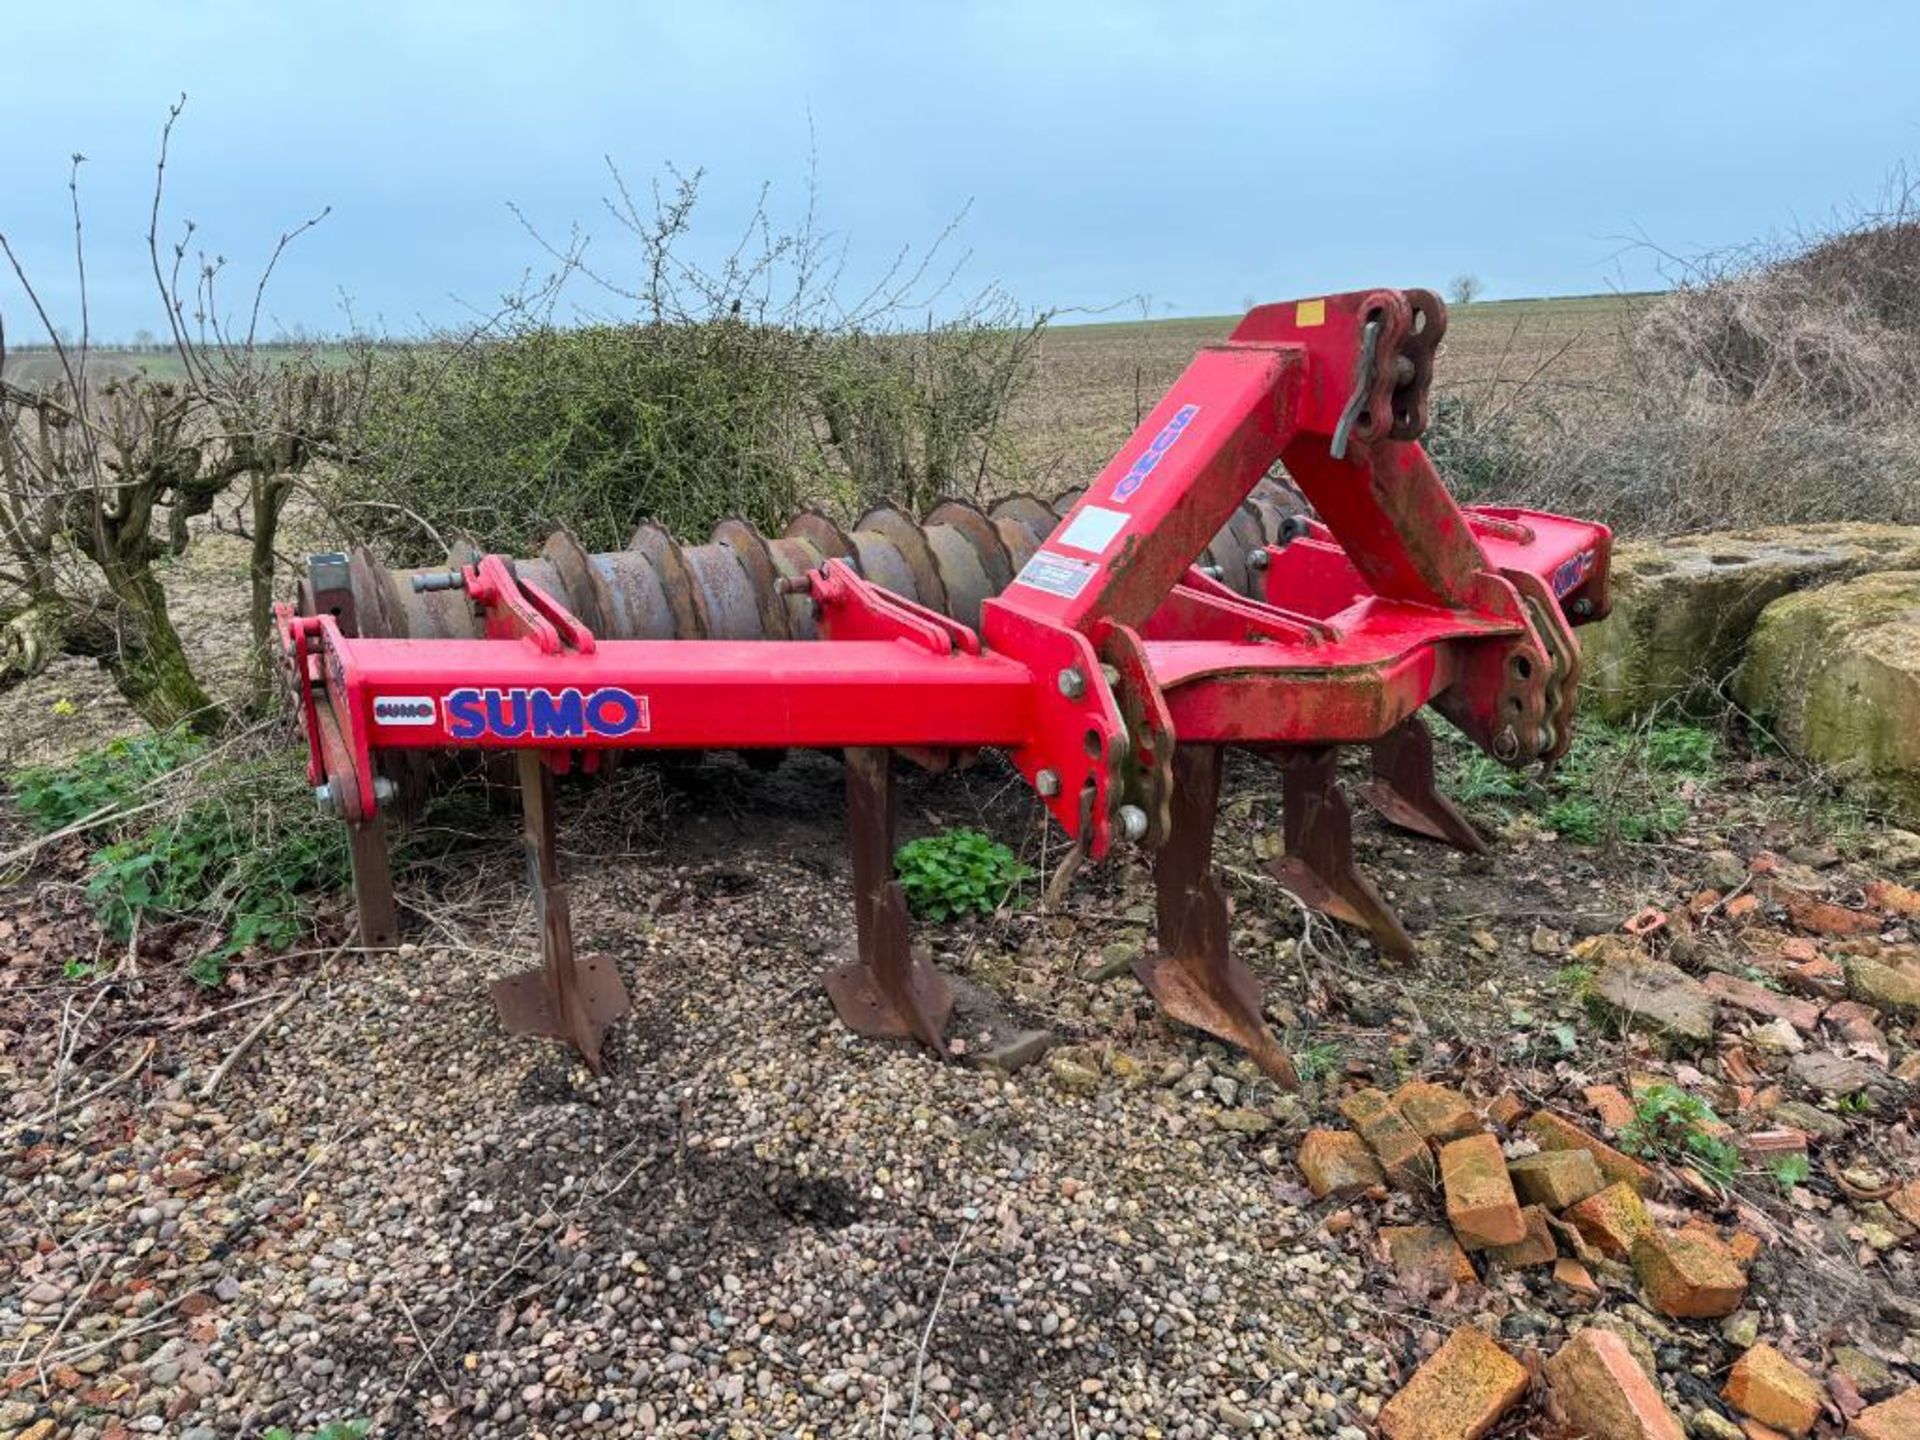 Sumo 5 leg subsoiler with rear packer, linkage mounted. Serial No: 09151 - Image 3 of 9